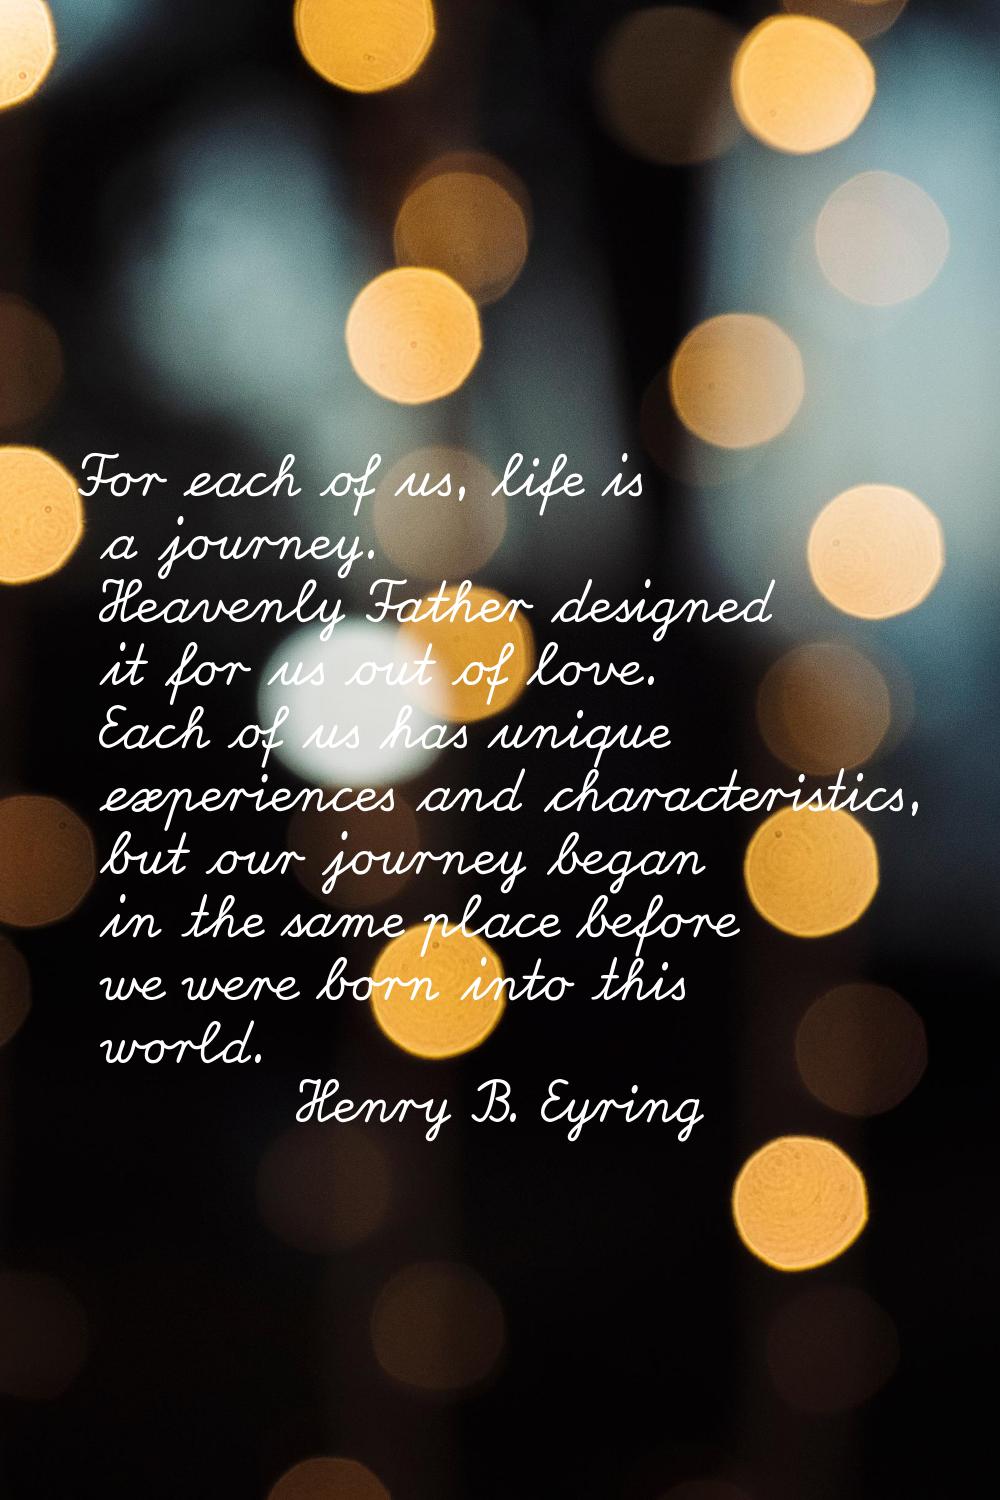 For each of us, life is a journey. Heavenly Father designed it for us out of love. Each of us has u